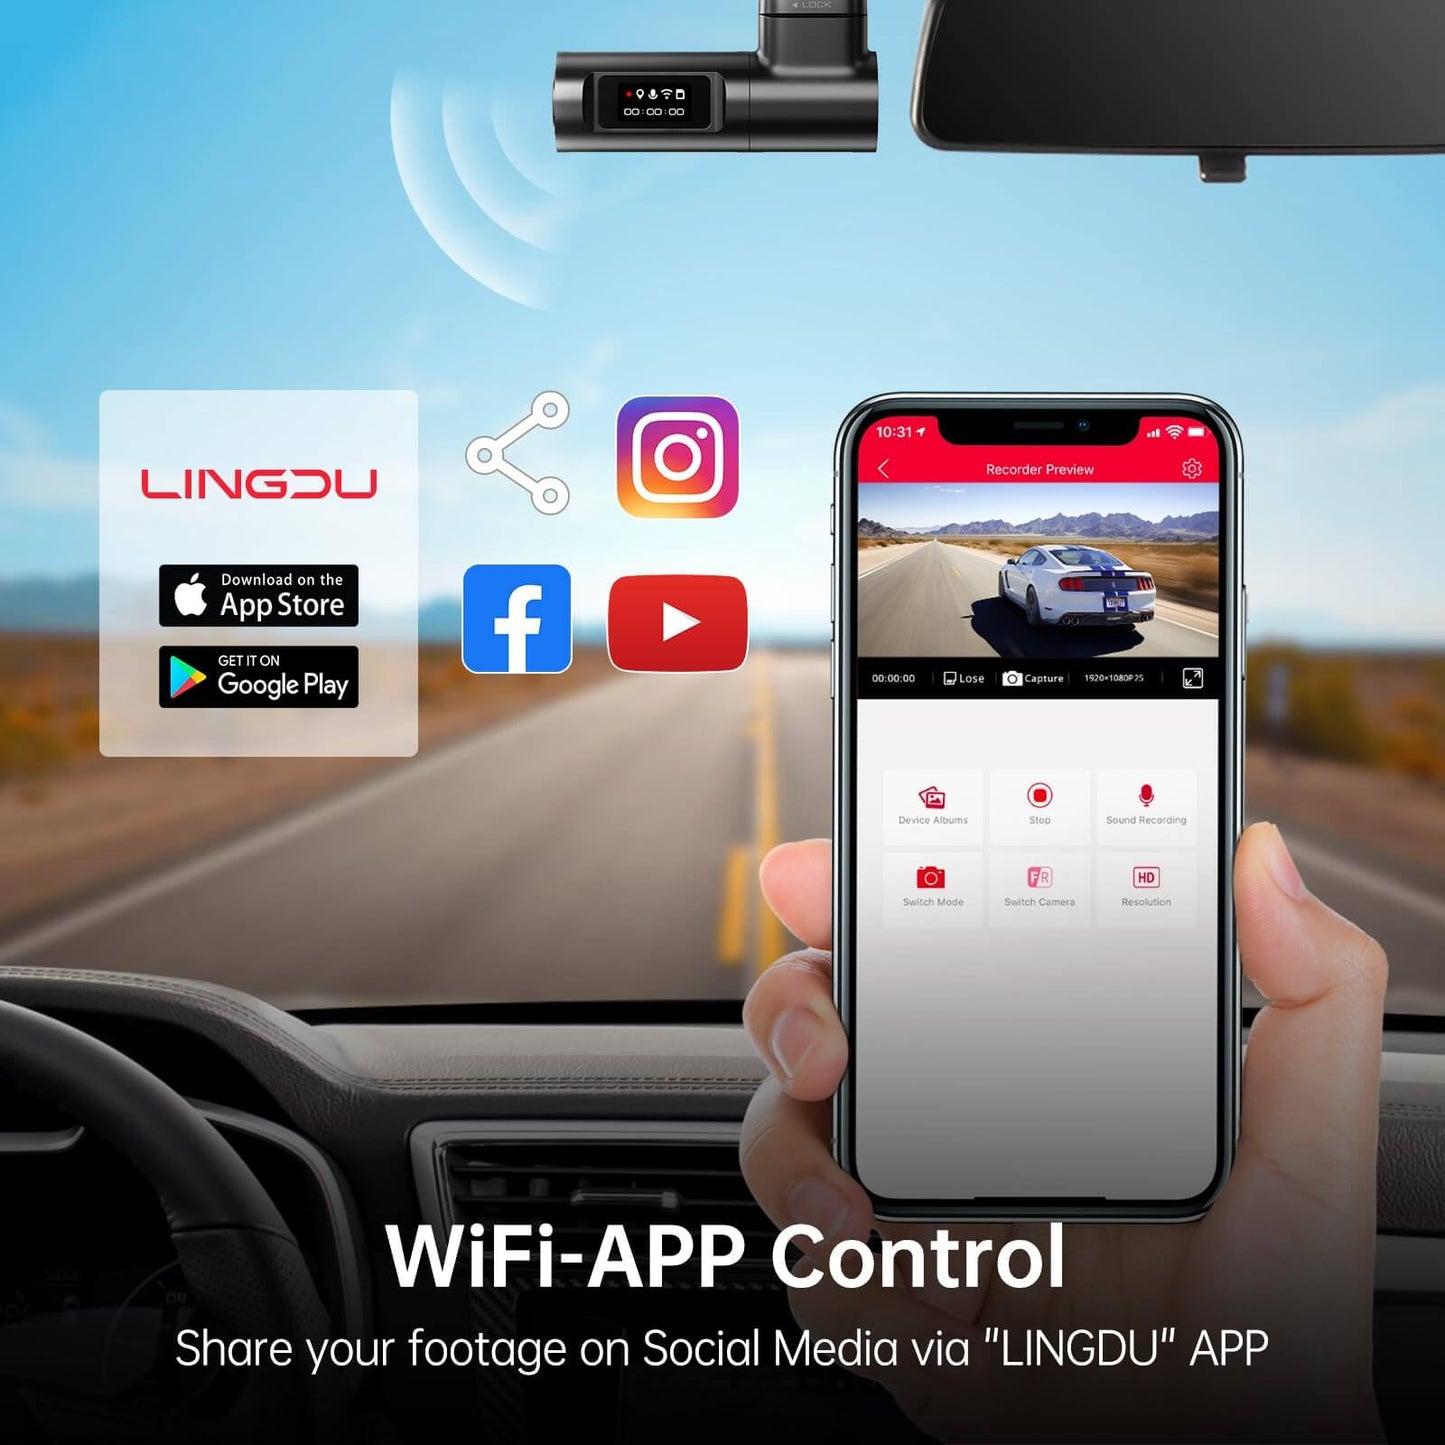 LINGDU D500 Dash Cam for Cars - The 4K Front Dash Cam with WiFi&GPS Providing Complete Protection